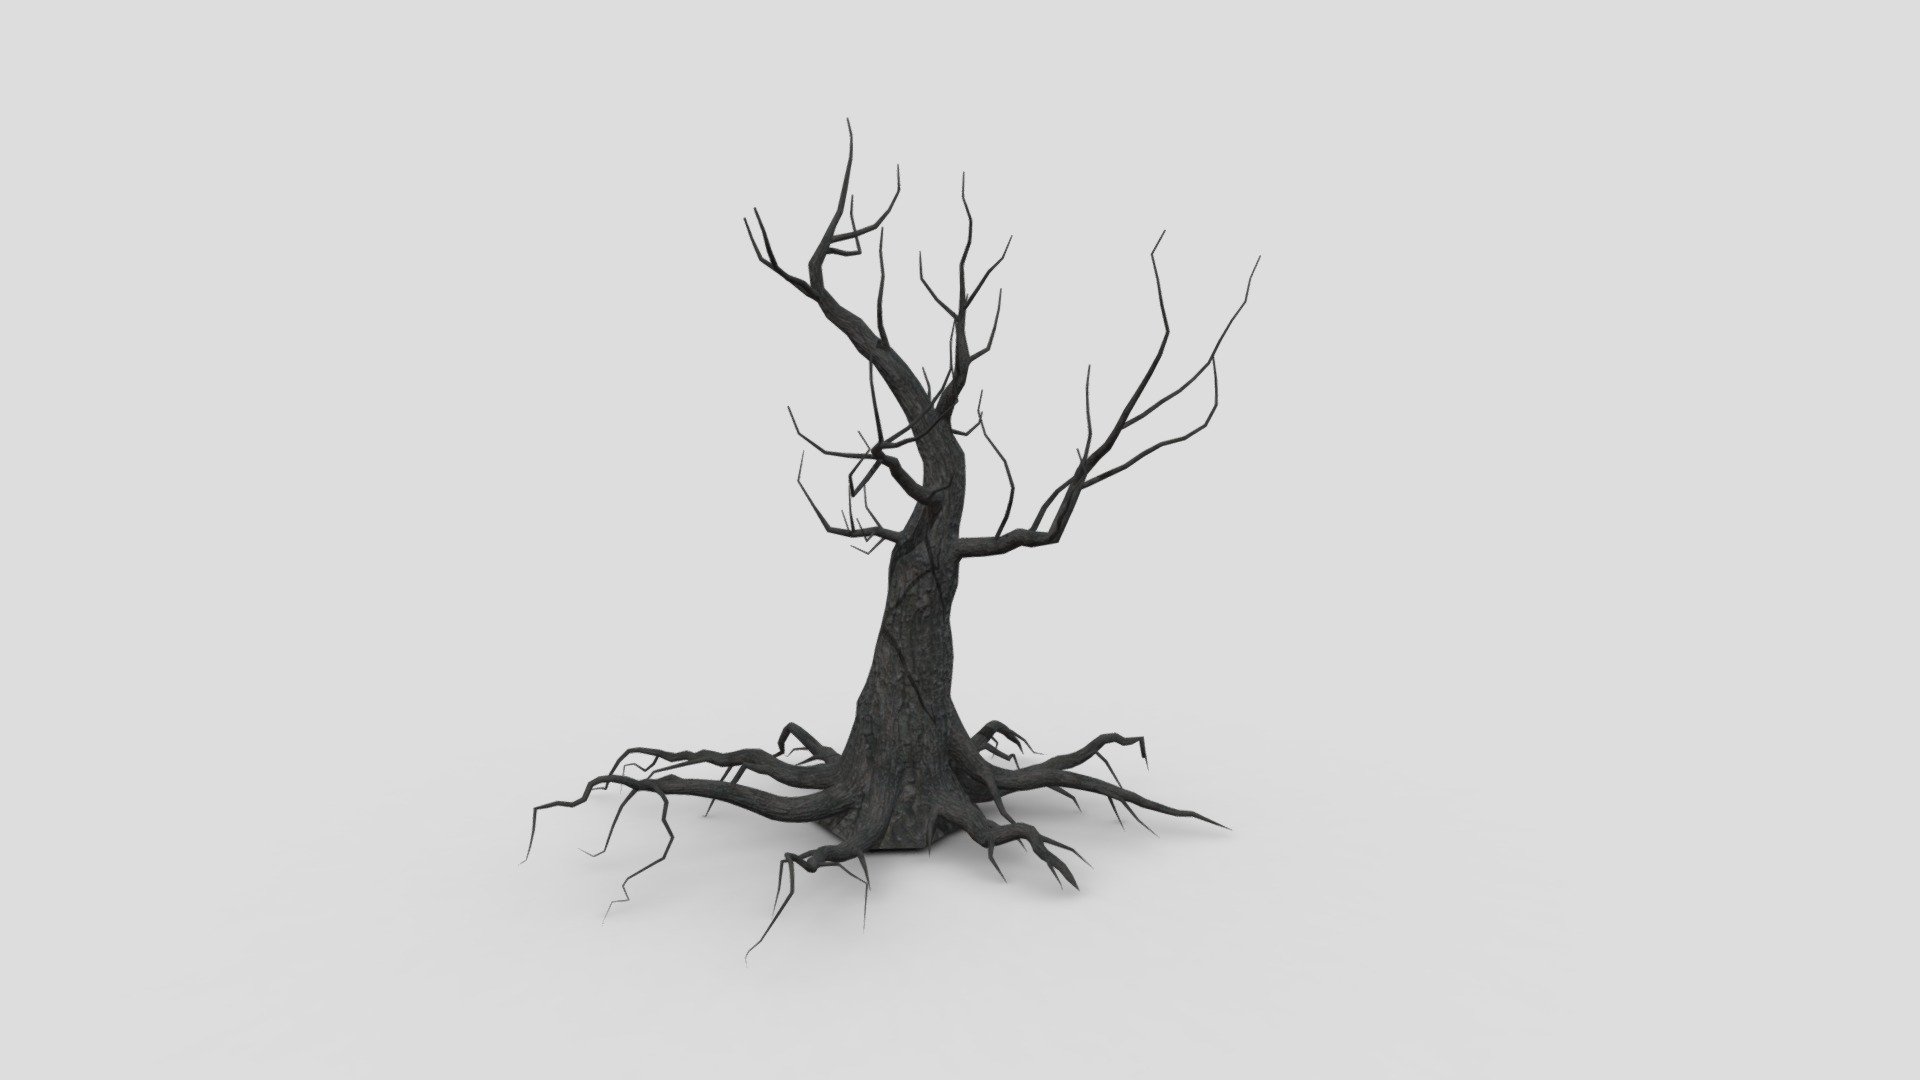 I Try to provide this kind of tree too use in your game and other project. I hope it will be useful for you 3d model